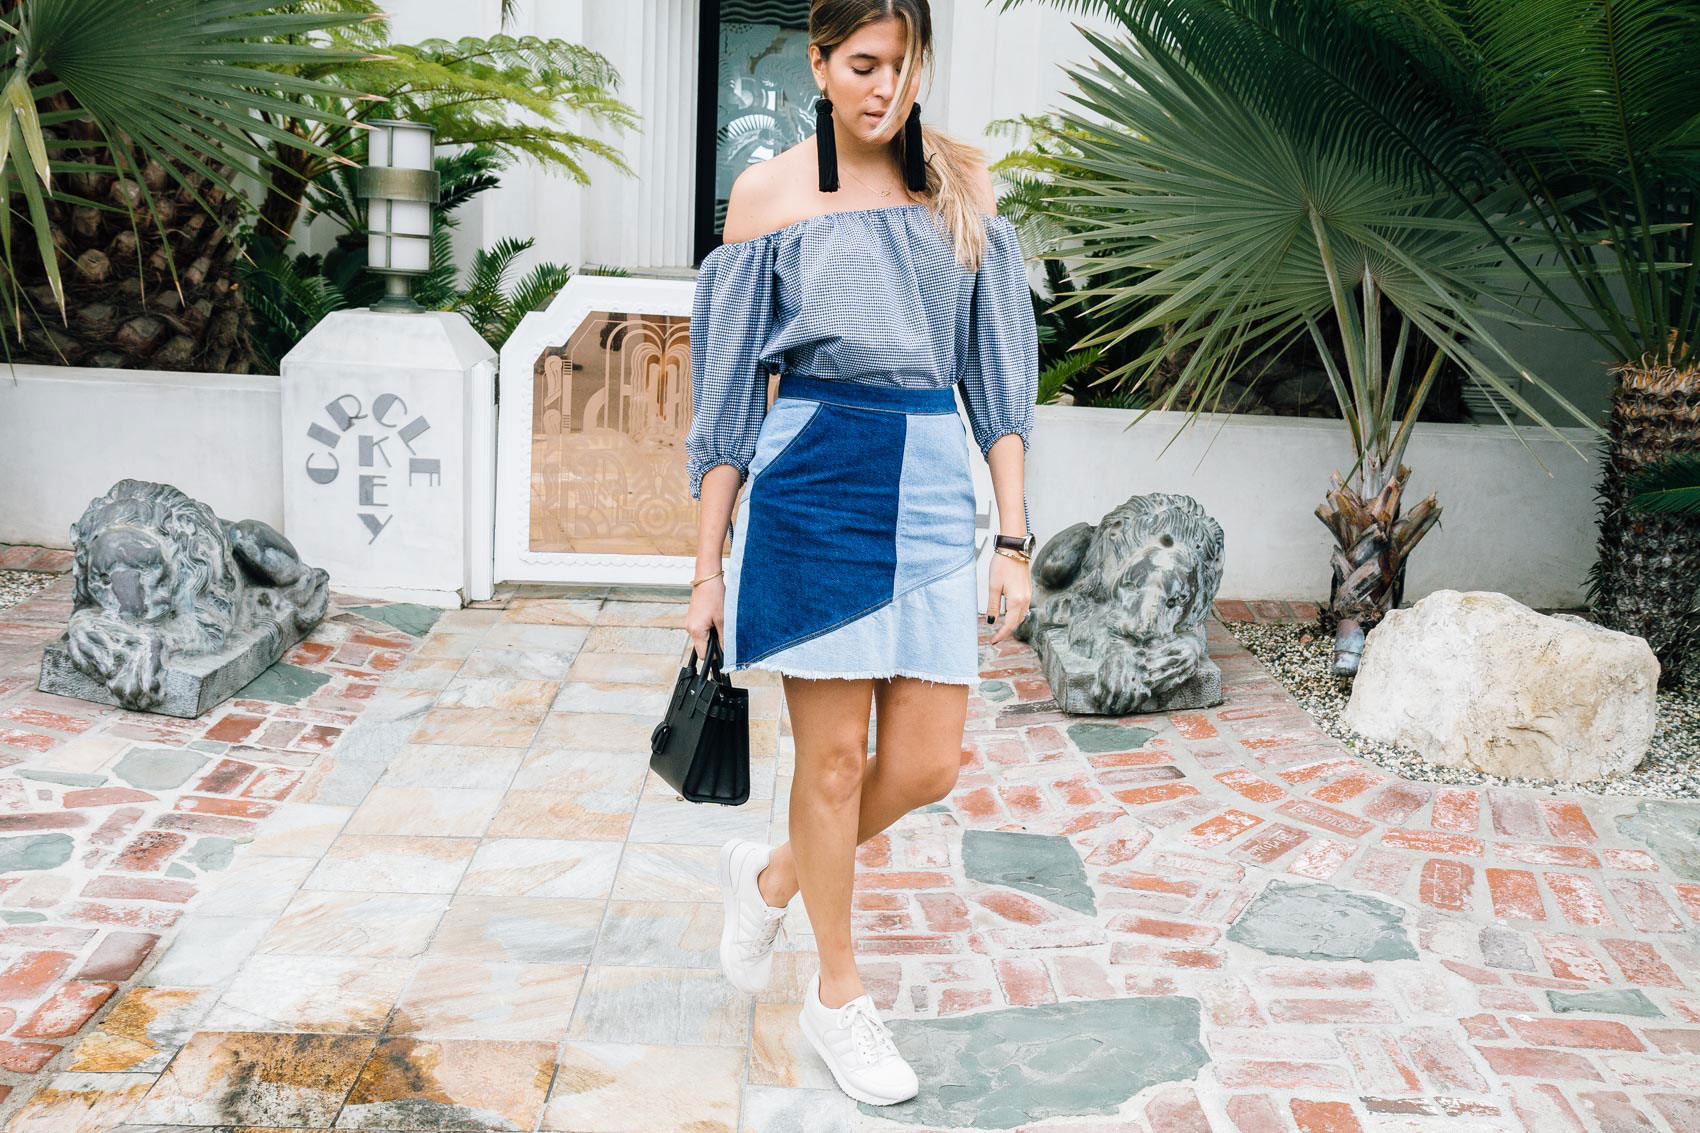 Maristella's sneaker and skirt outfit idea for a casual everyday style